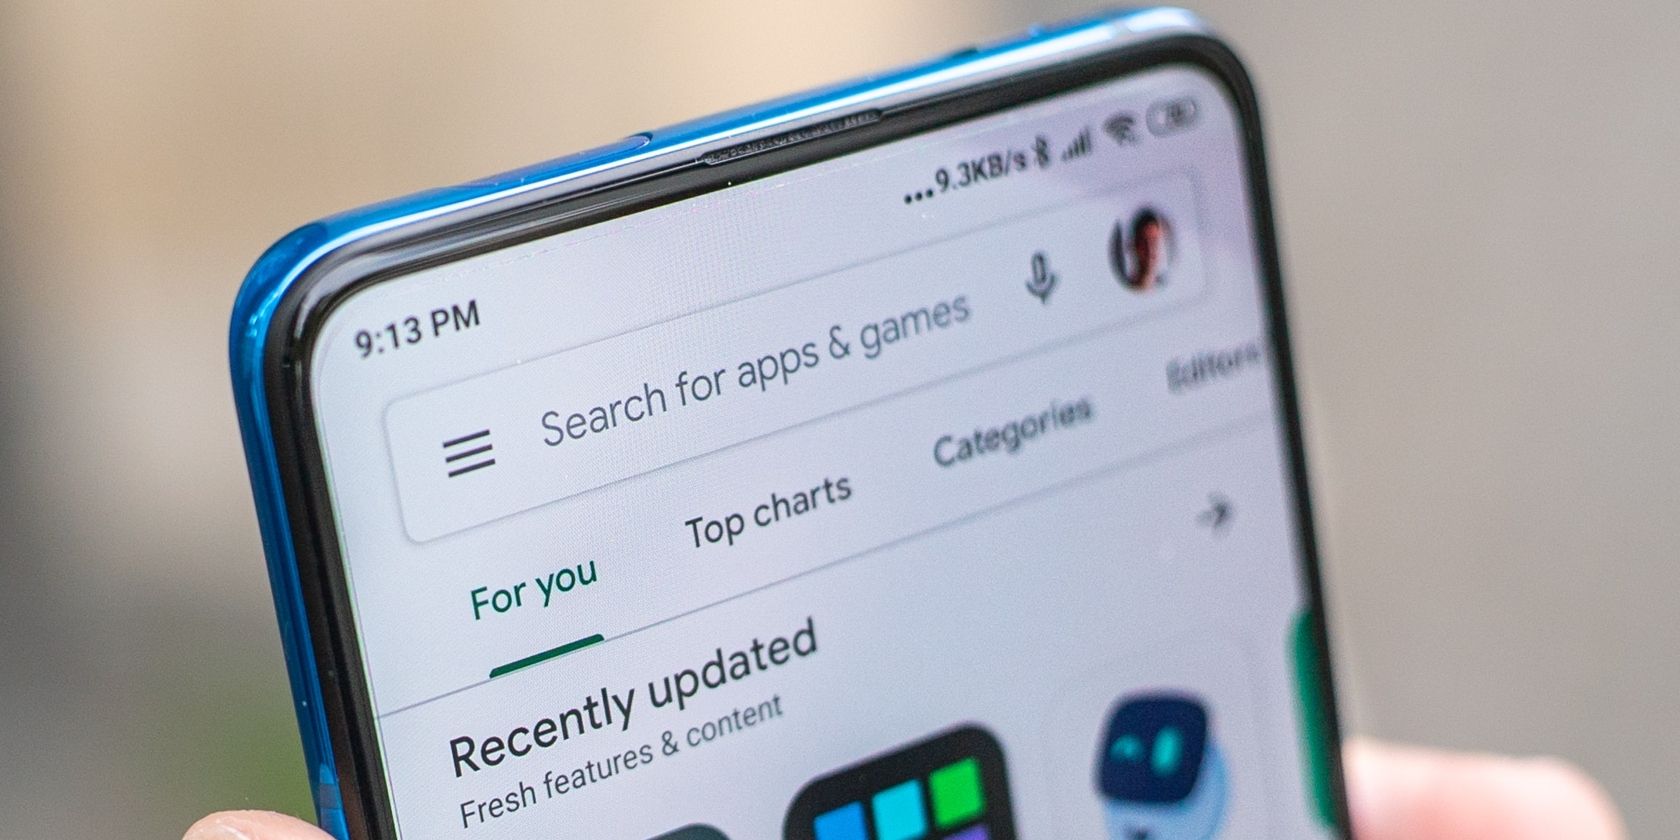 Google Play Store open on Android phone